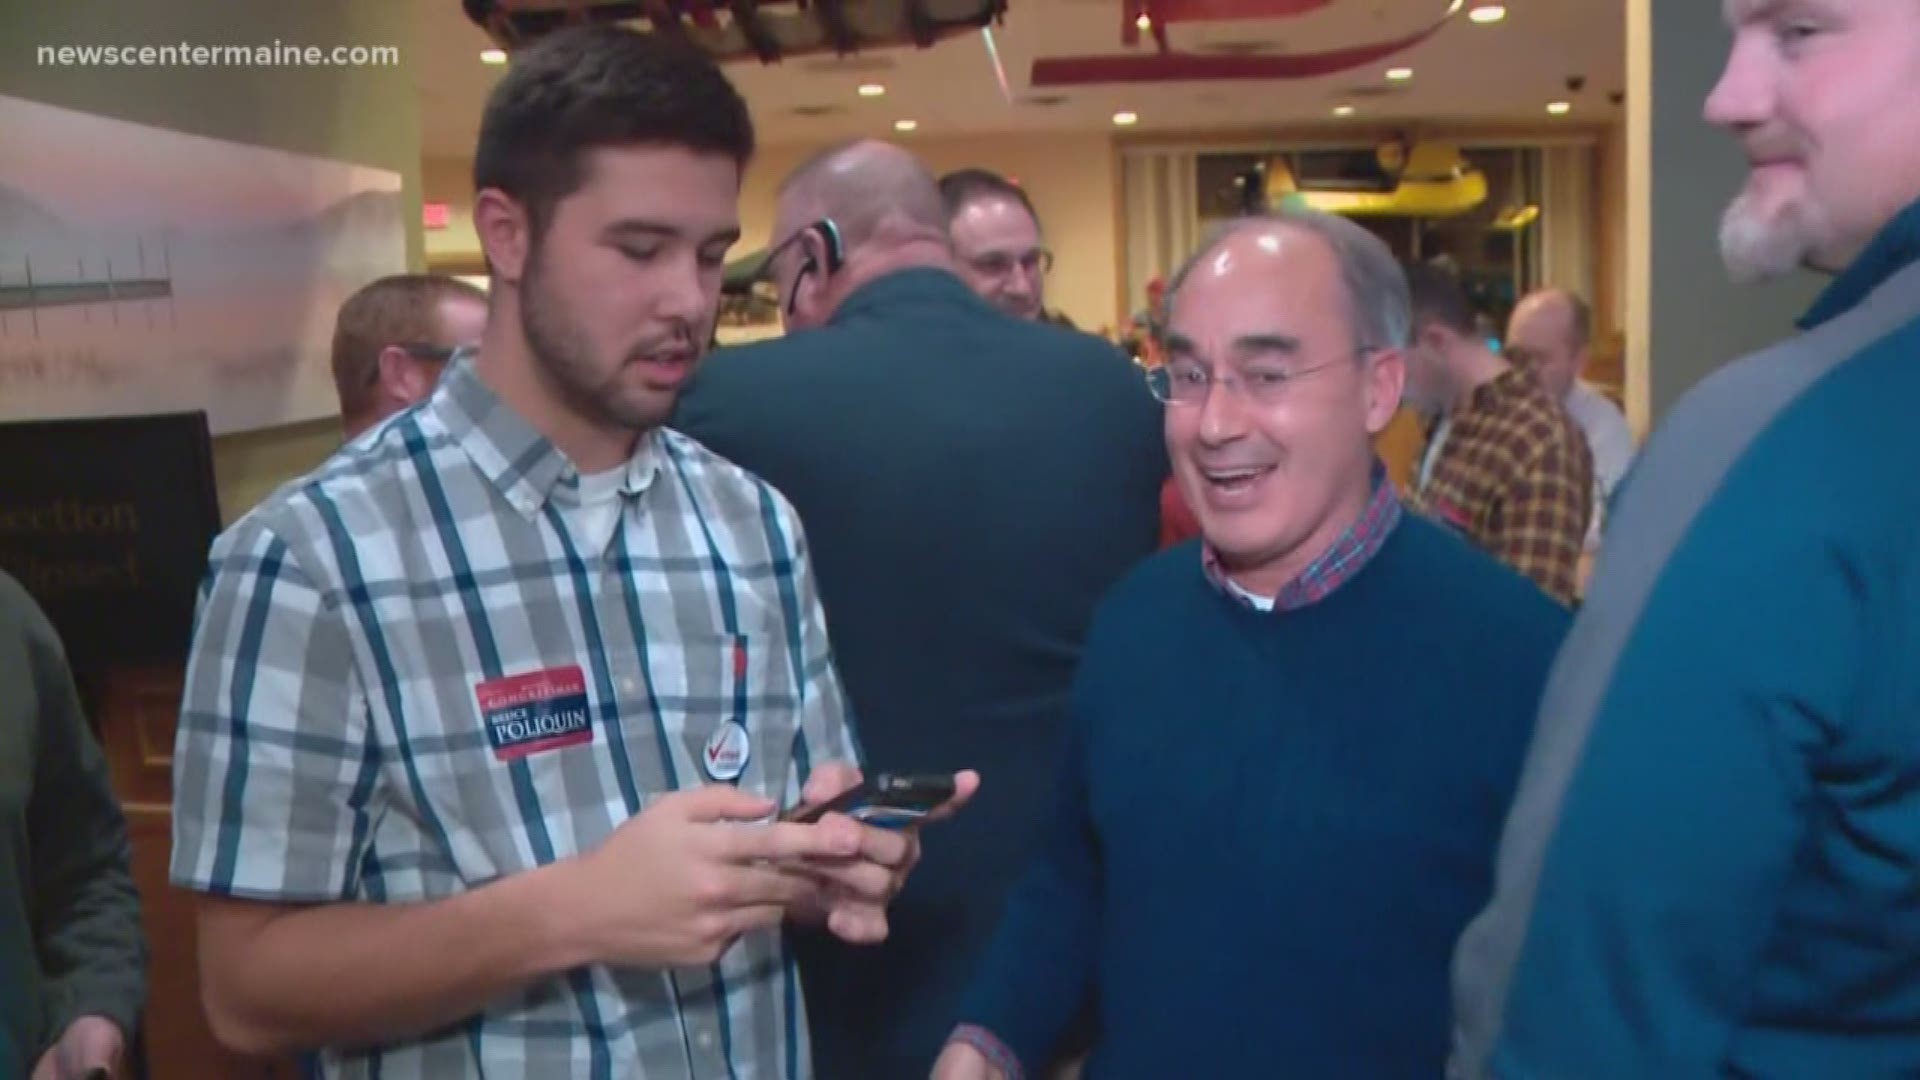 Poliquin has until end of day Monday to request recount